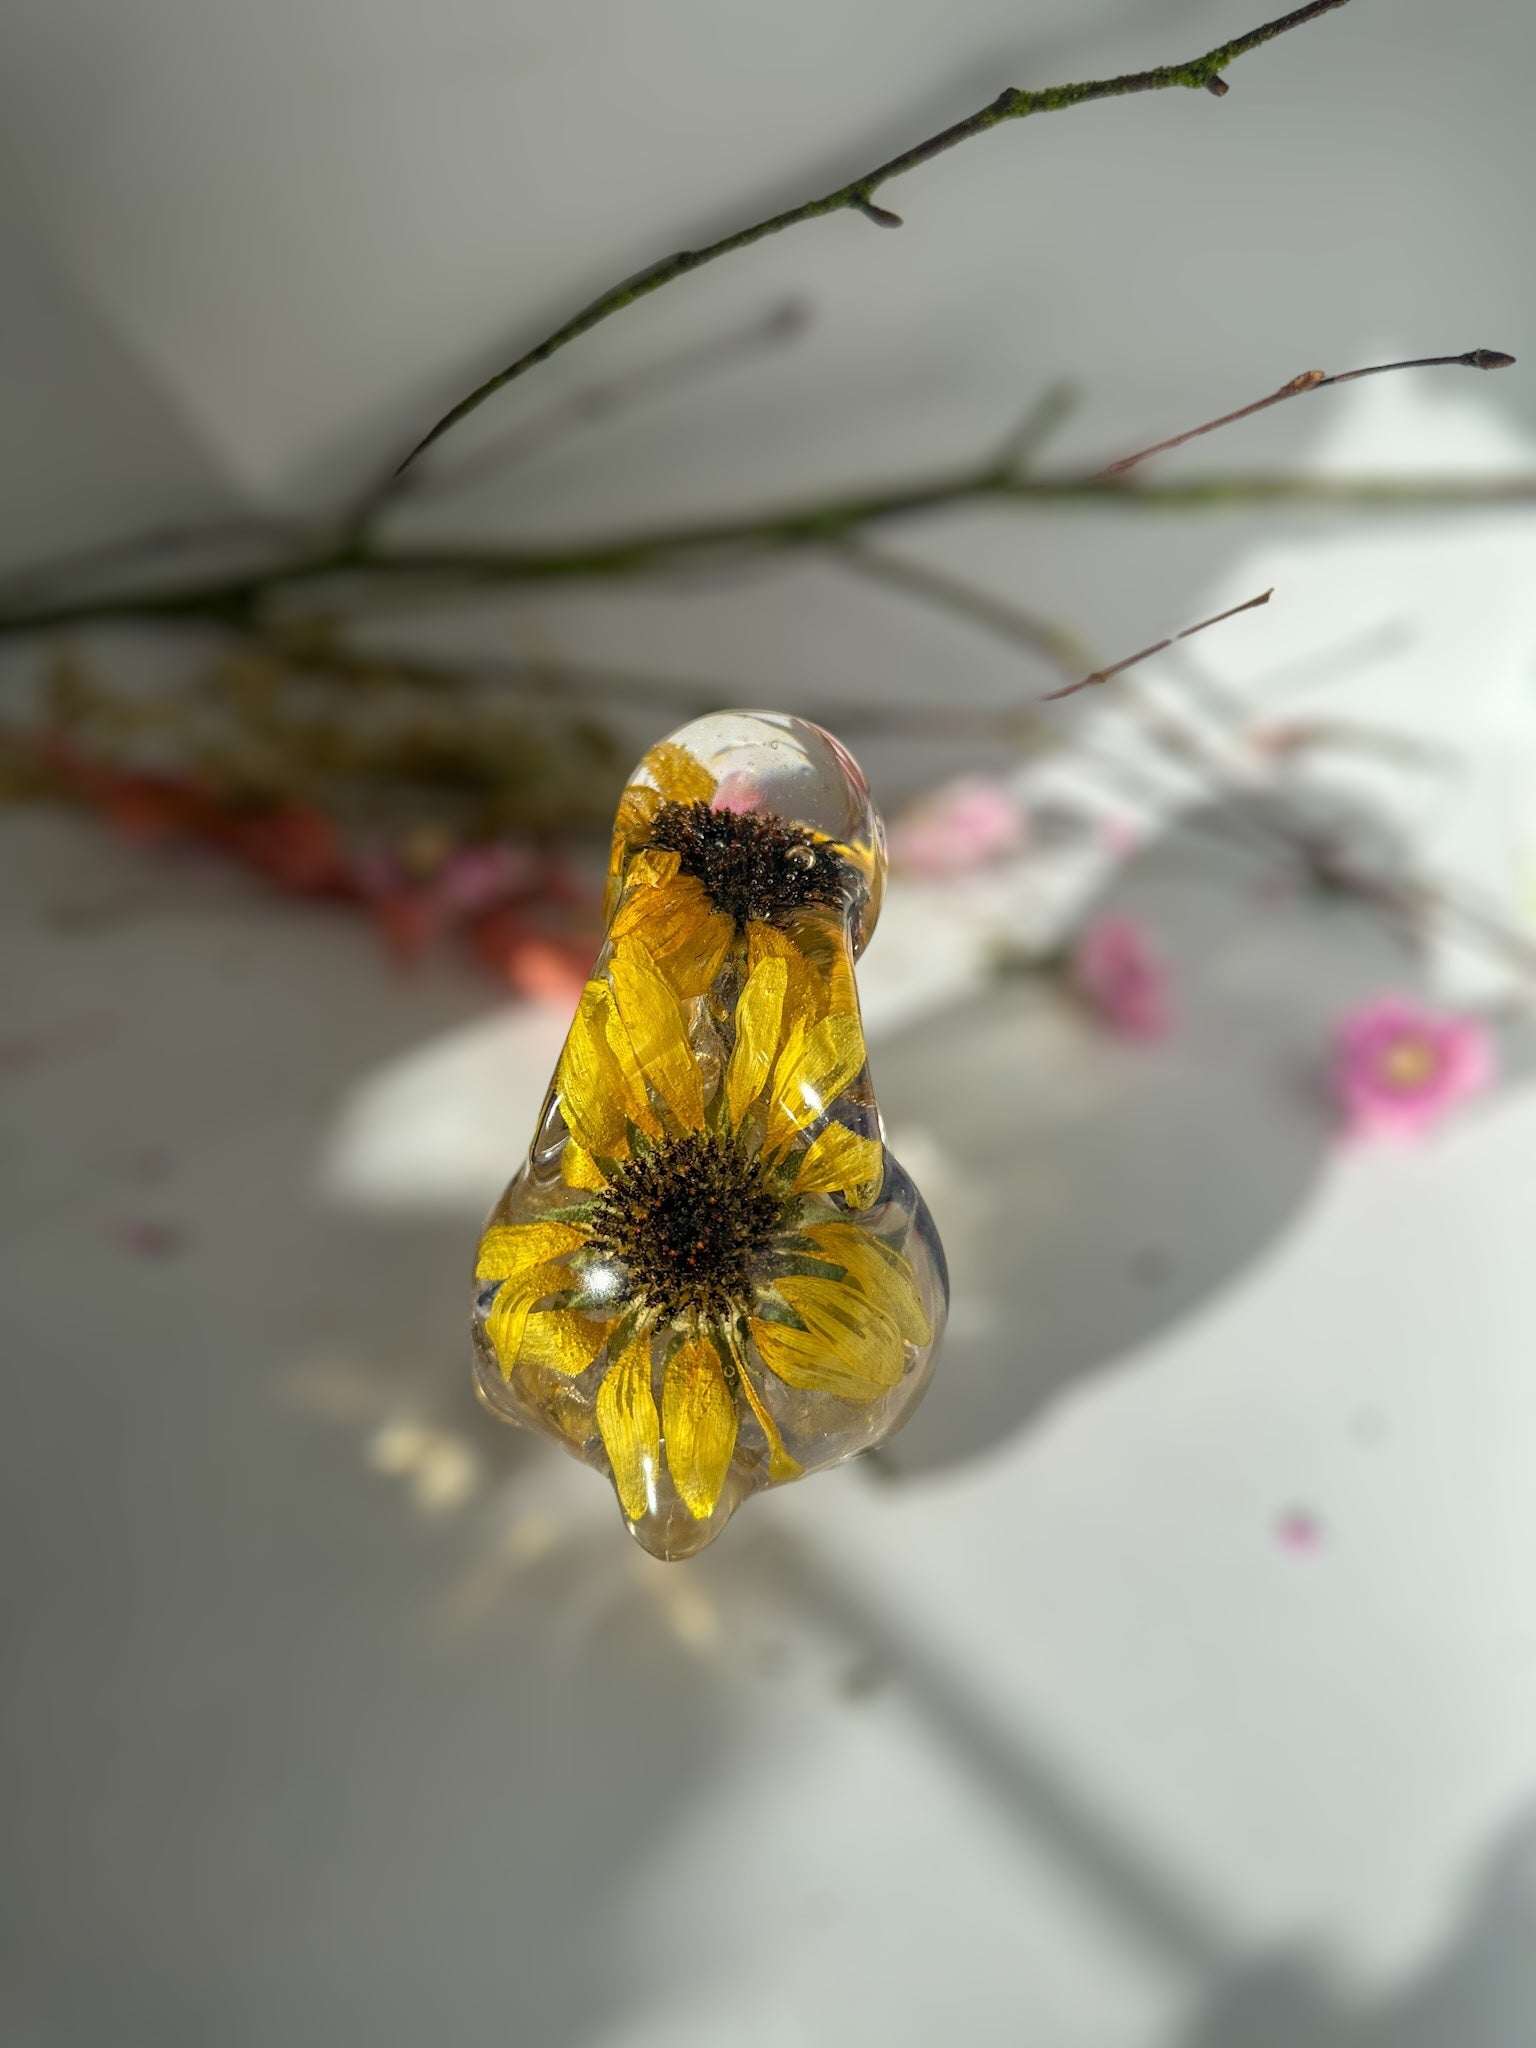 Sunflower Bunny: Handcrafted Resin Bunny with Real Sunflowers